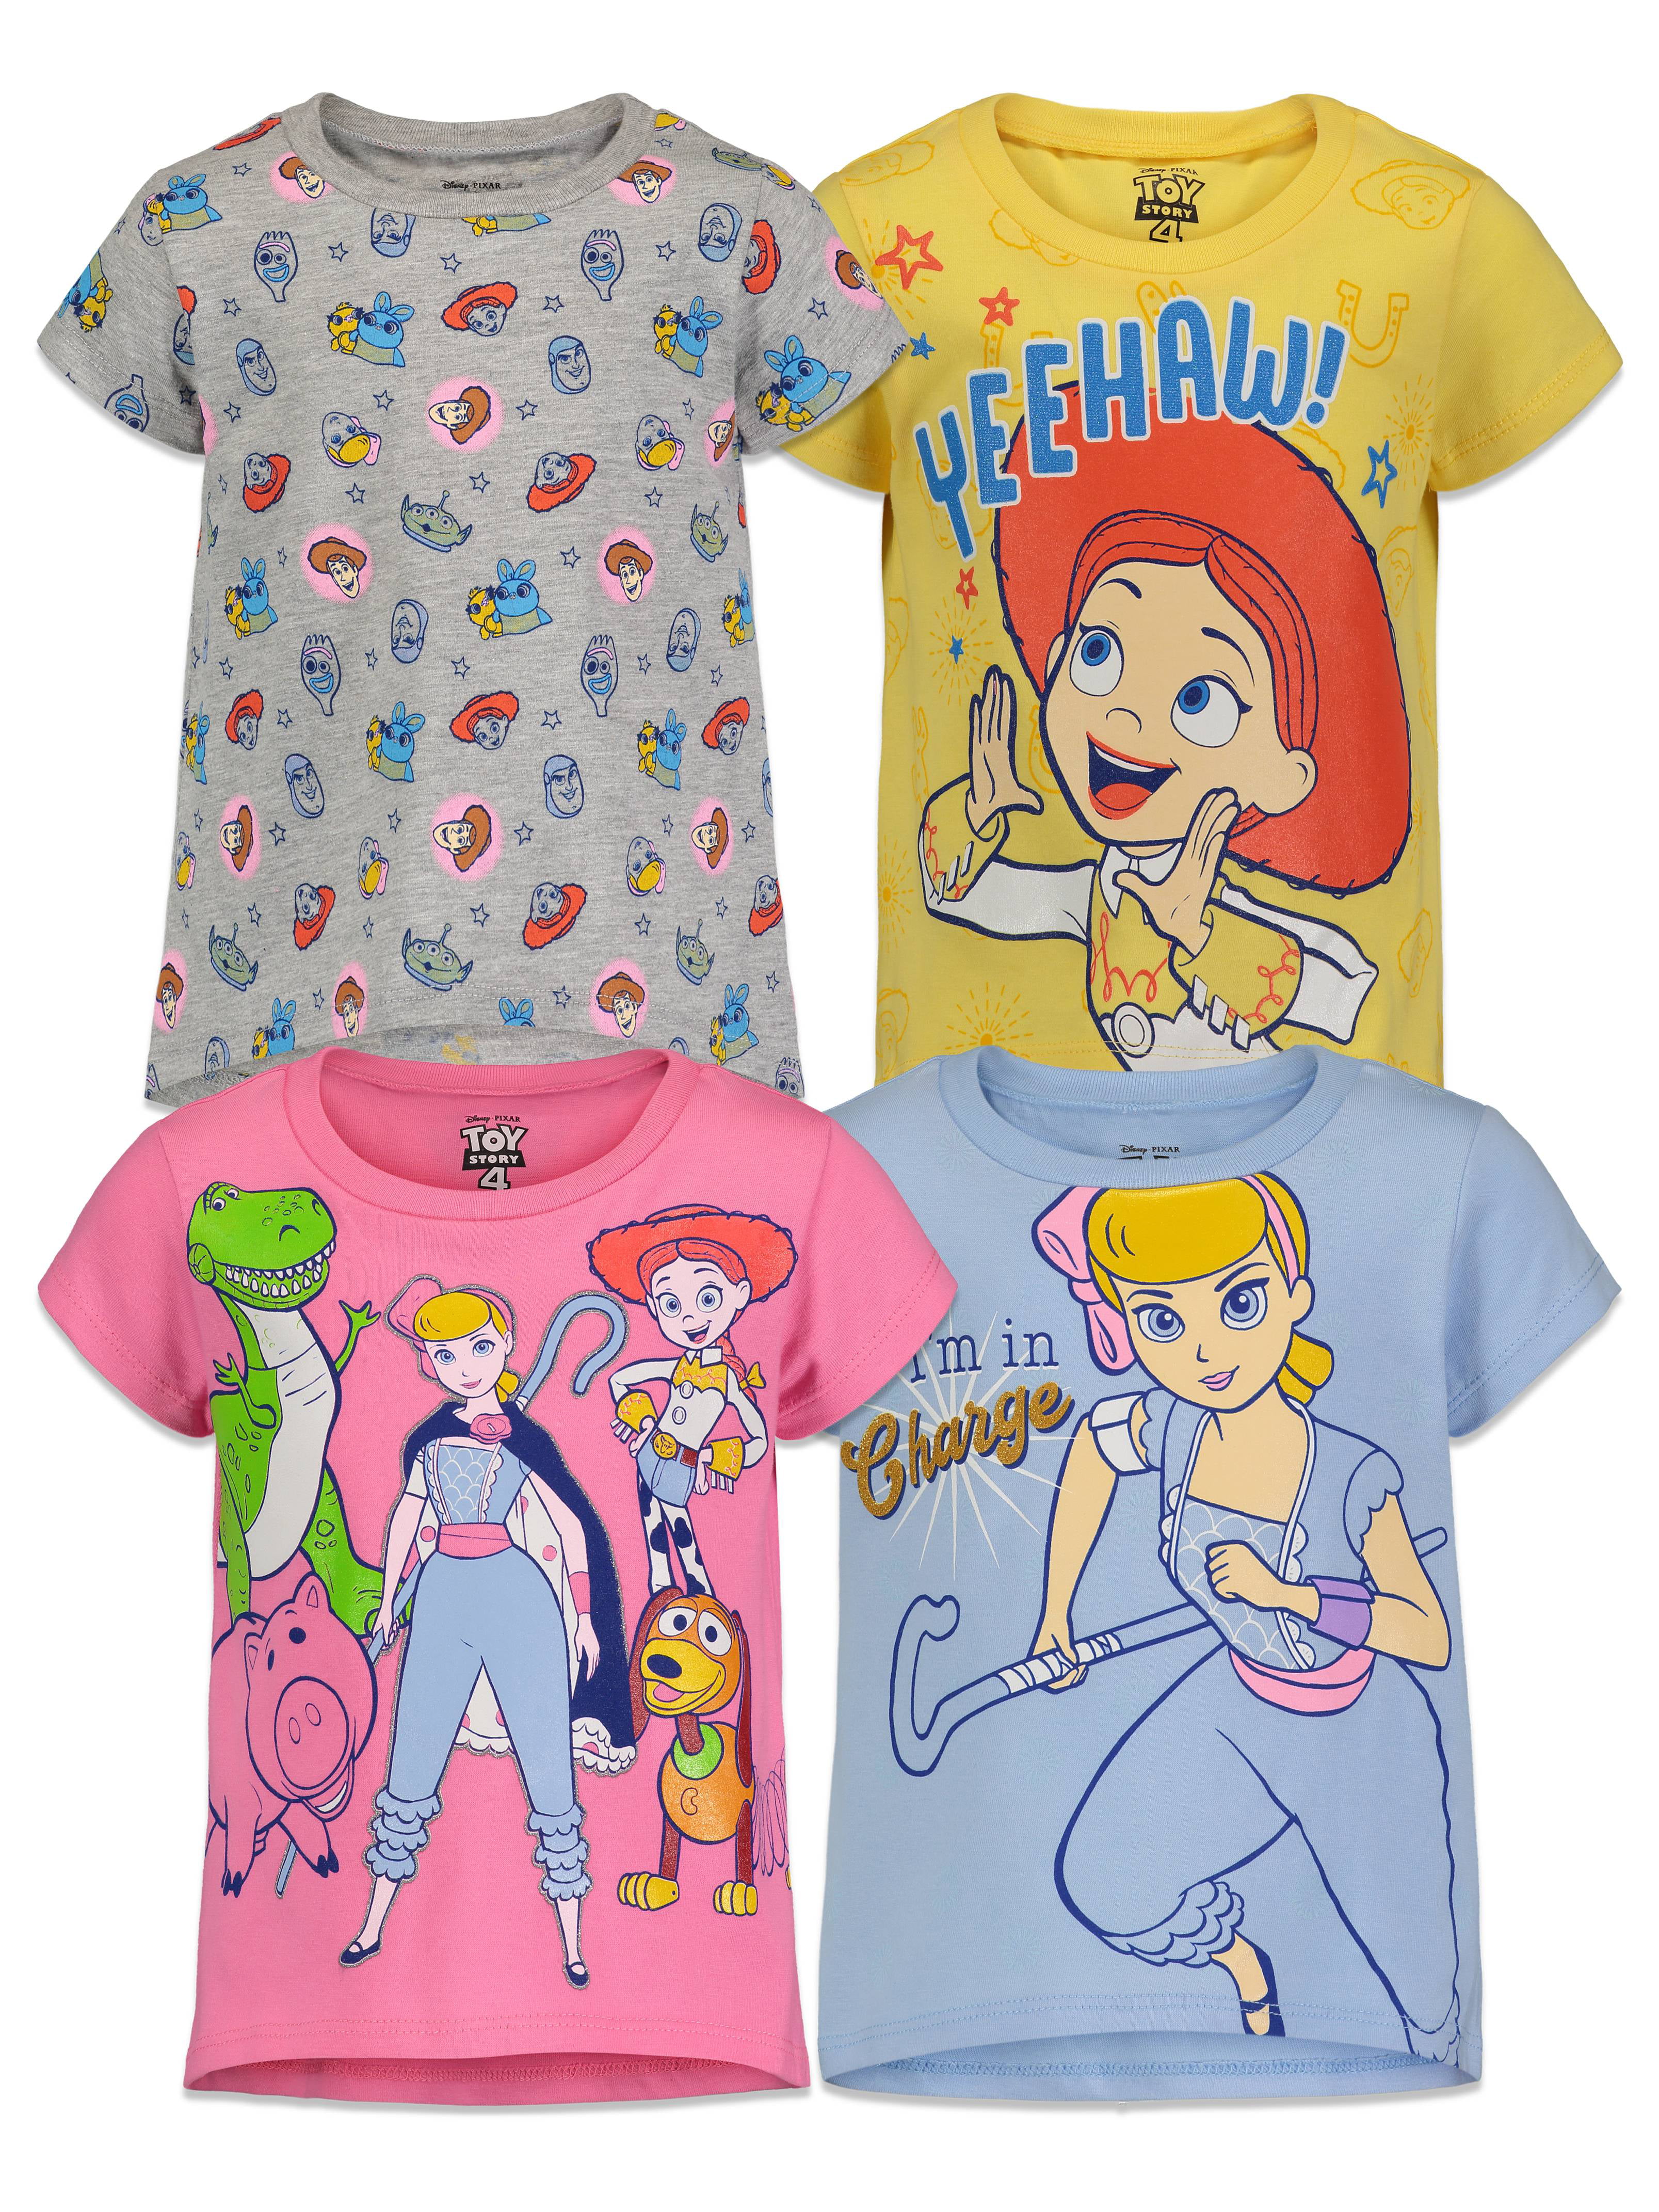 Toy Story Bo Peep T-shirt available in Adult Unisex Men's S-3XL Ladies Youth Kids Baby sizes -ts3-